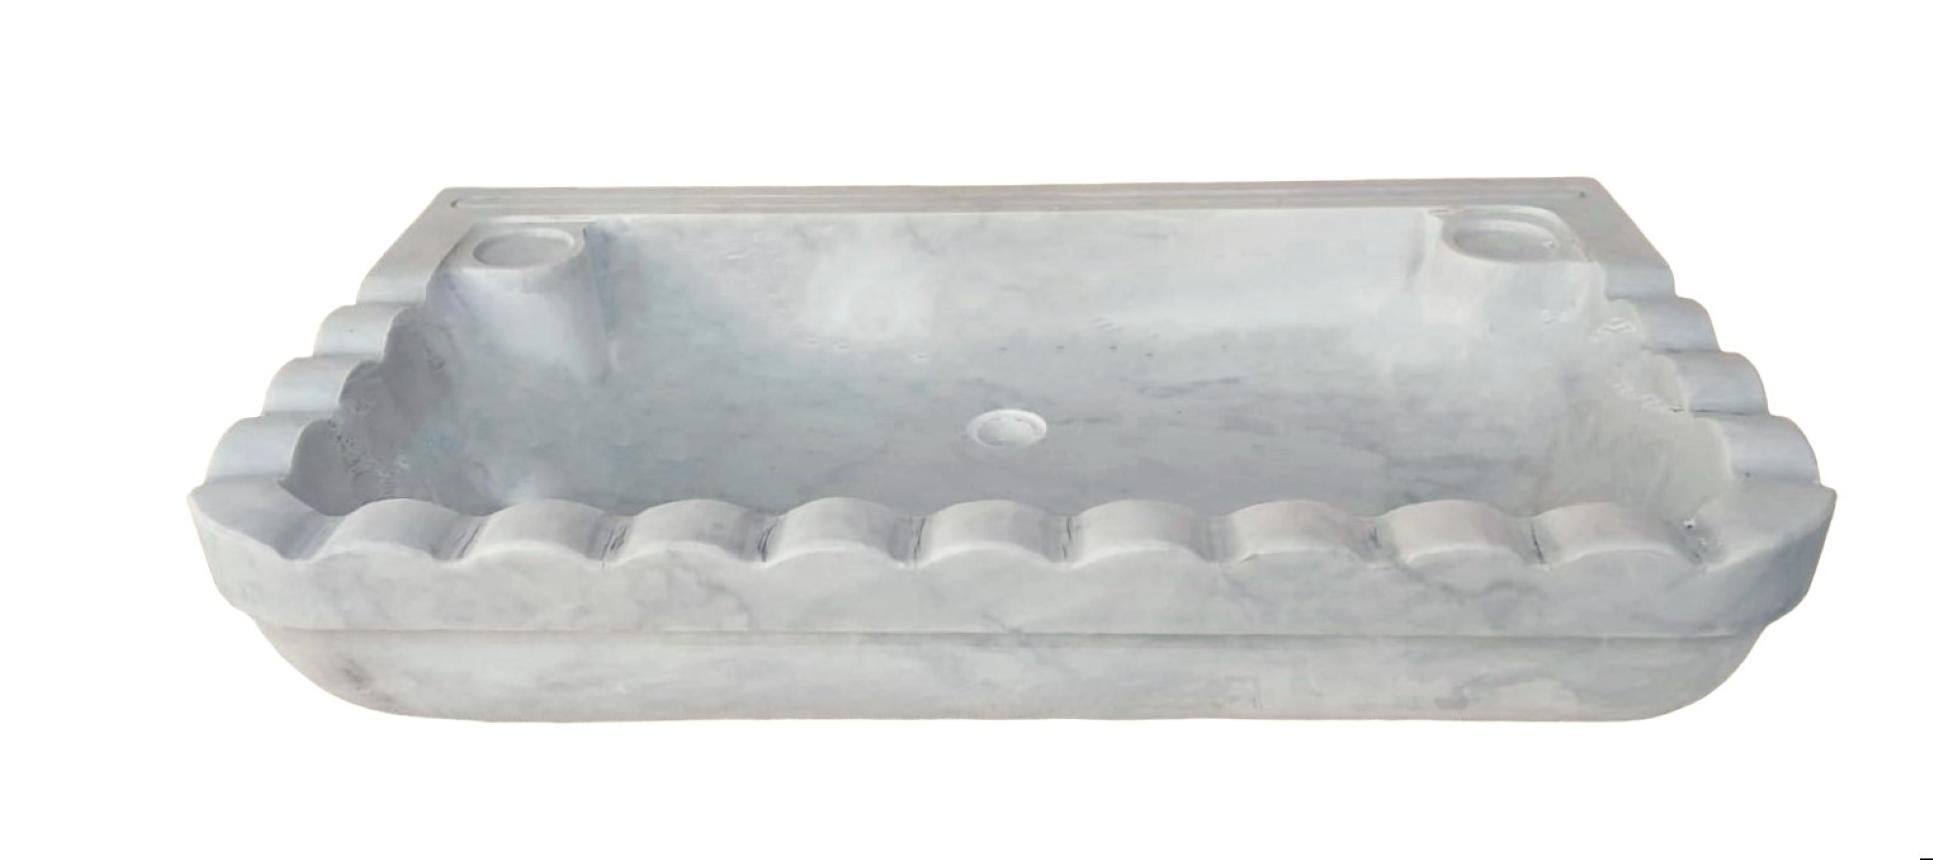 This Carrara Marble sink is made in Italy in the actual marble from the Carrara mines just outside Carrara itself, the design was picked up from an original model found in Greece and decided to take into production so variables of stone are